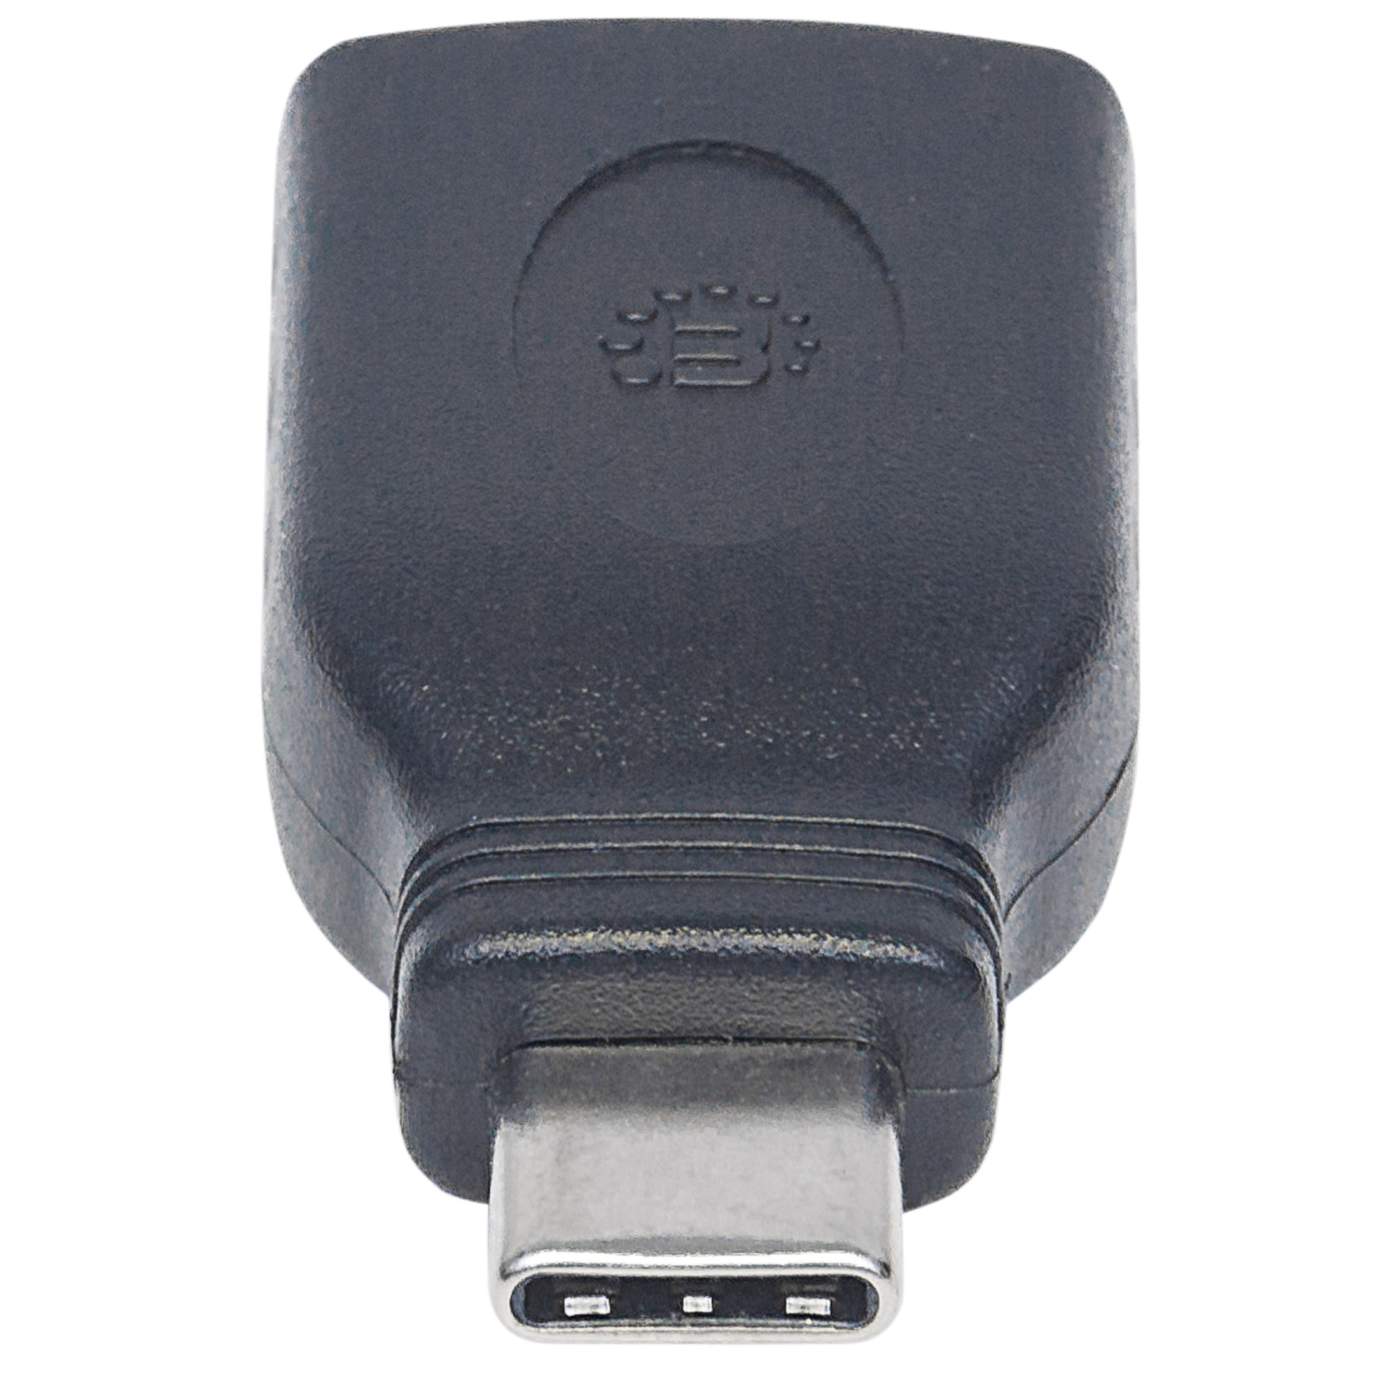 USB-C to USB-A Adapter Image 4